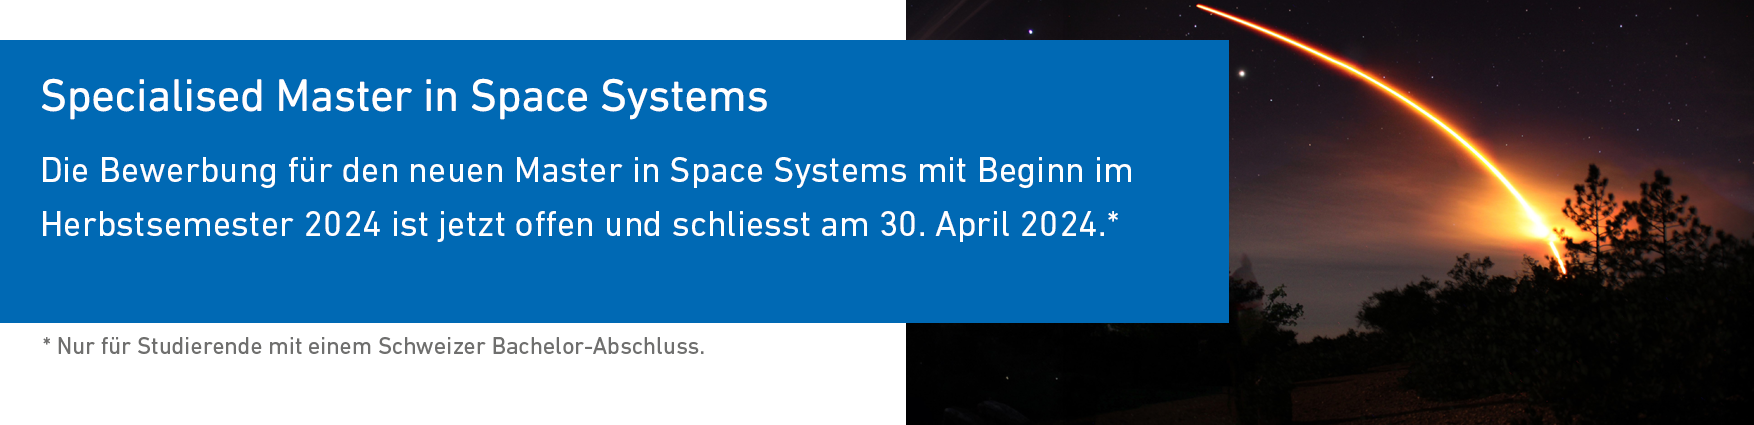 Specialised Master in Space Systems